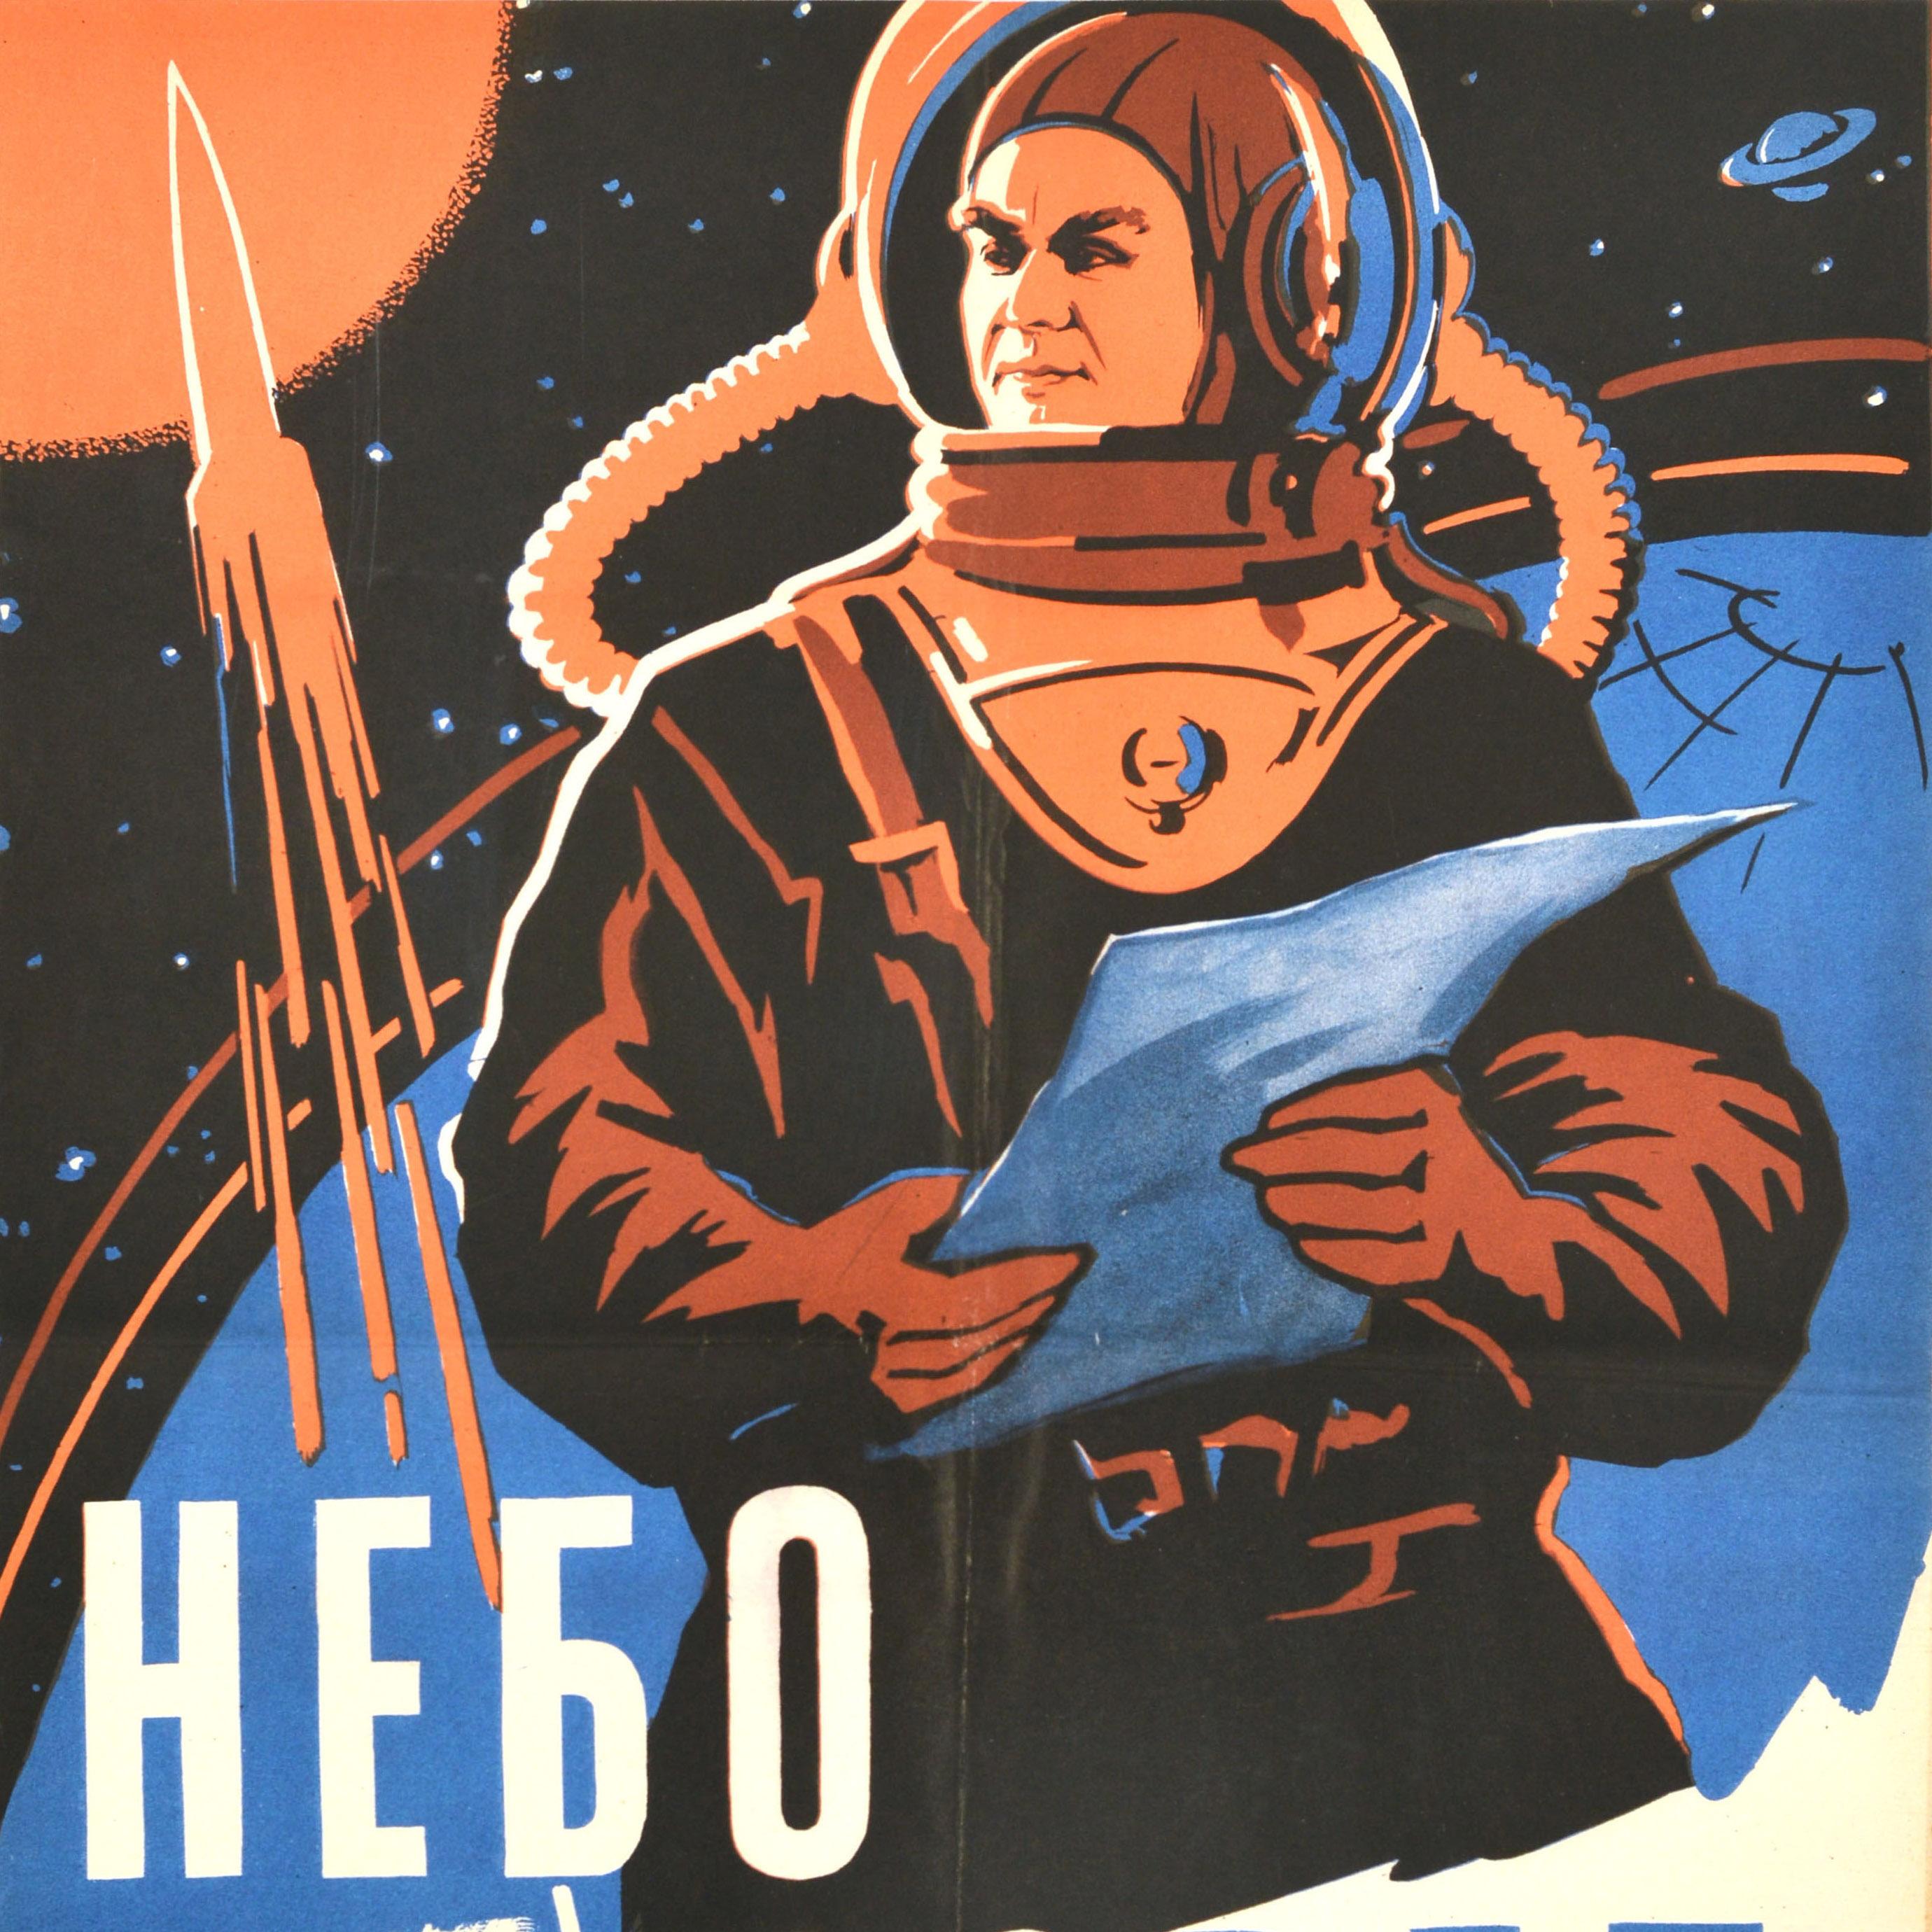 Original Vintage Russian SciFi Movie Poster Battle Beyond The Sun Space Race - Print by Unknown